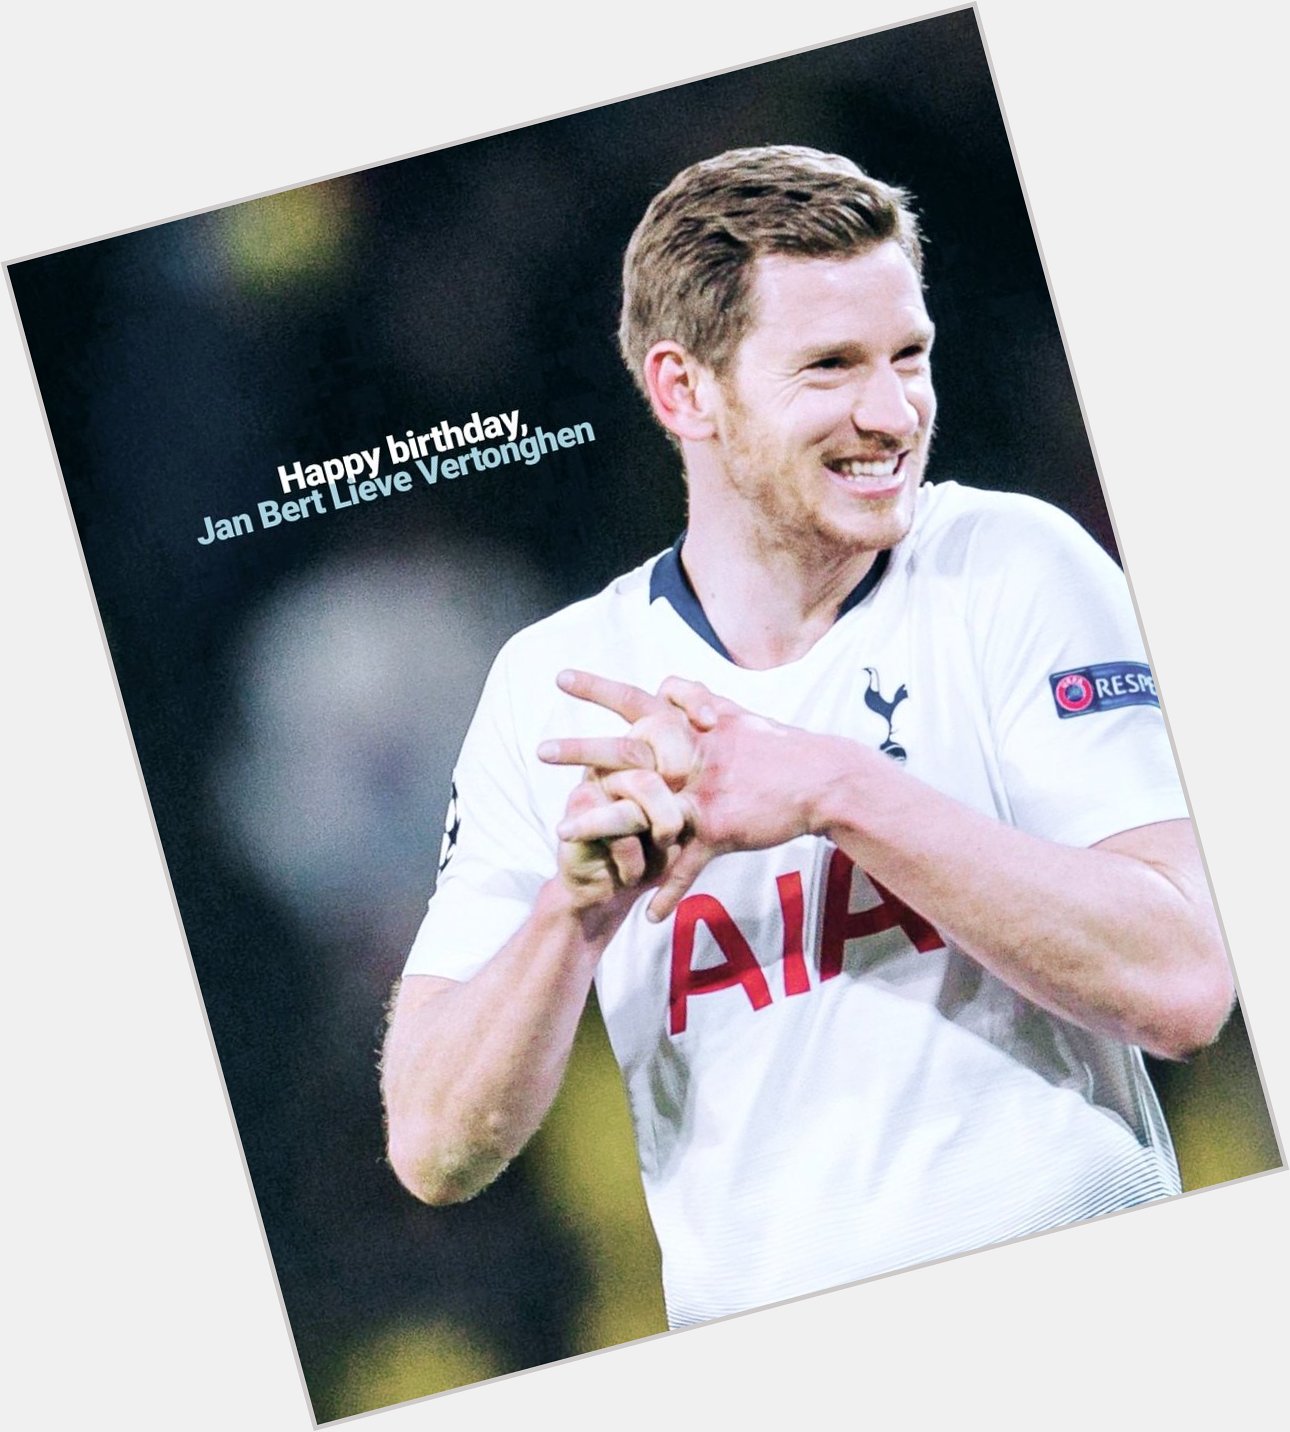 Happy birthday to these lovely players, Jan Vertonghen and Ben Davies !   